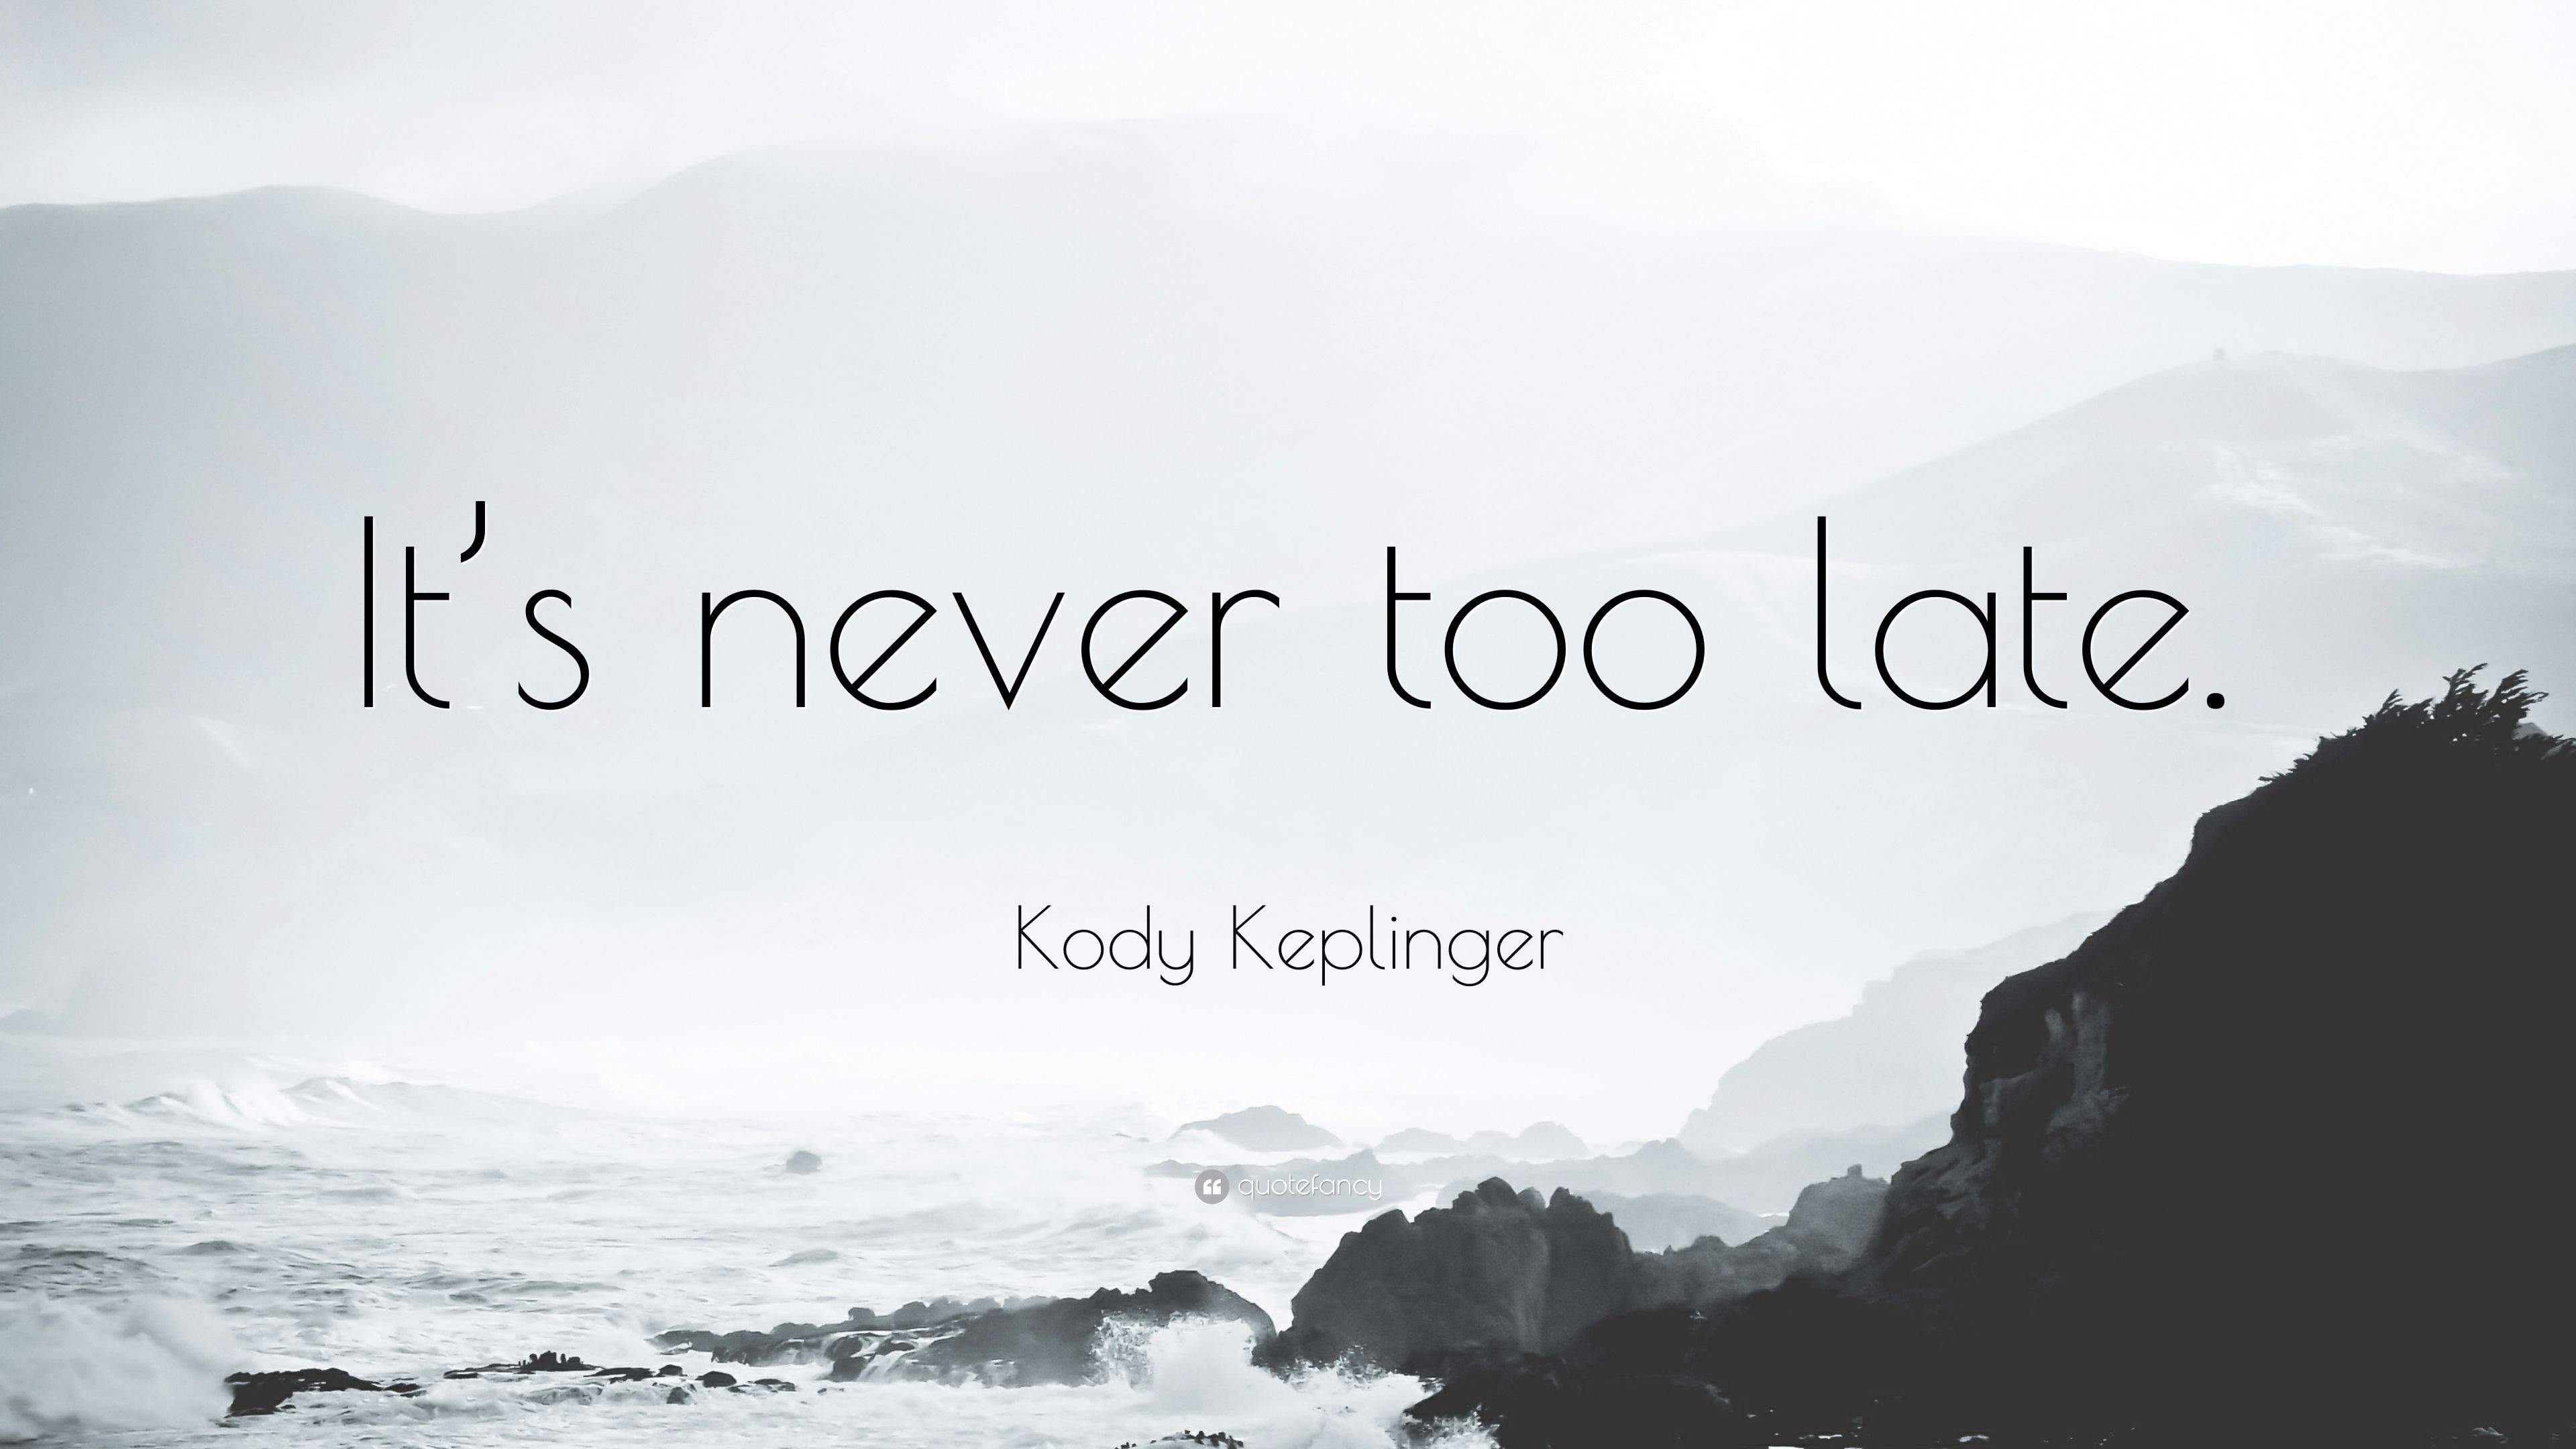 Kody Keplinger Quote: “It's never too late.”